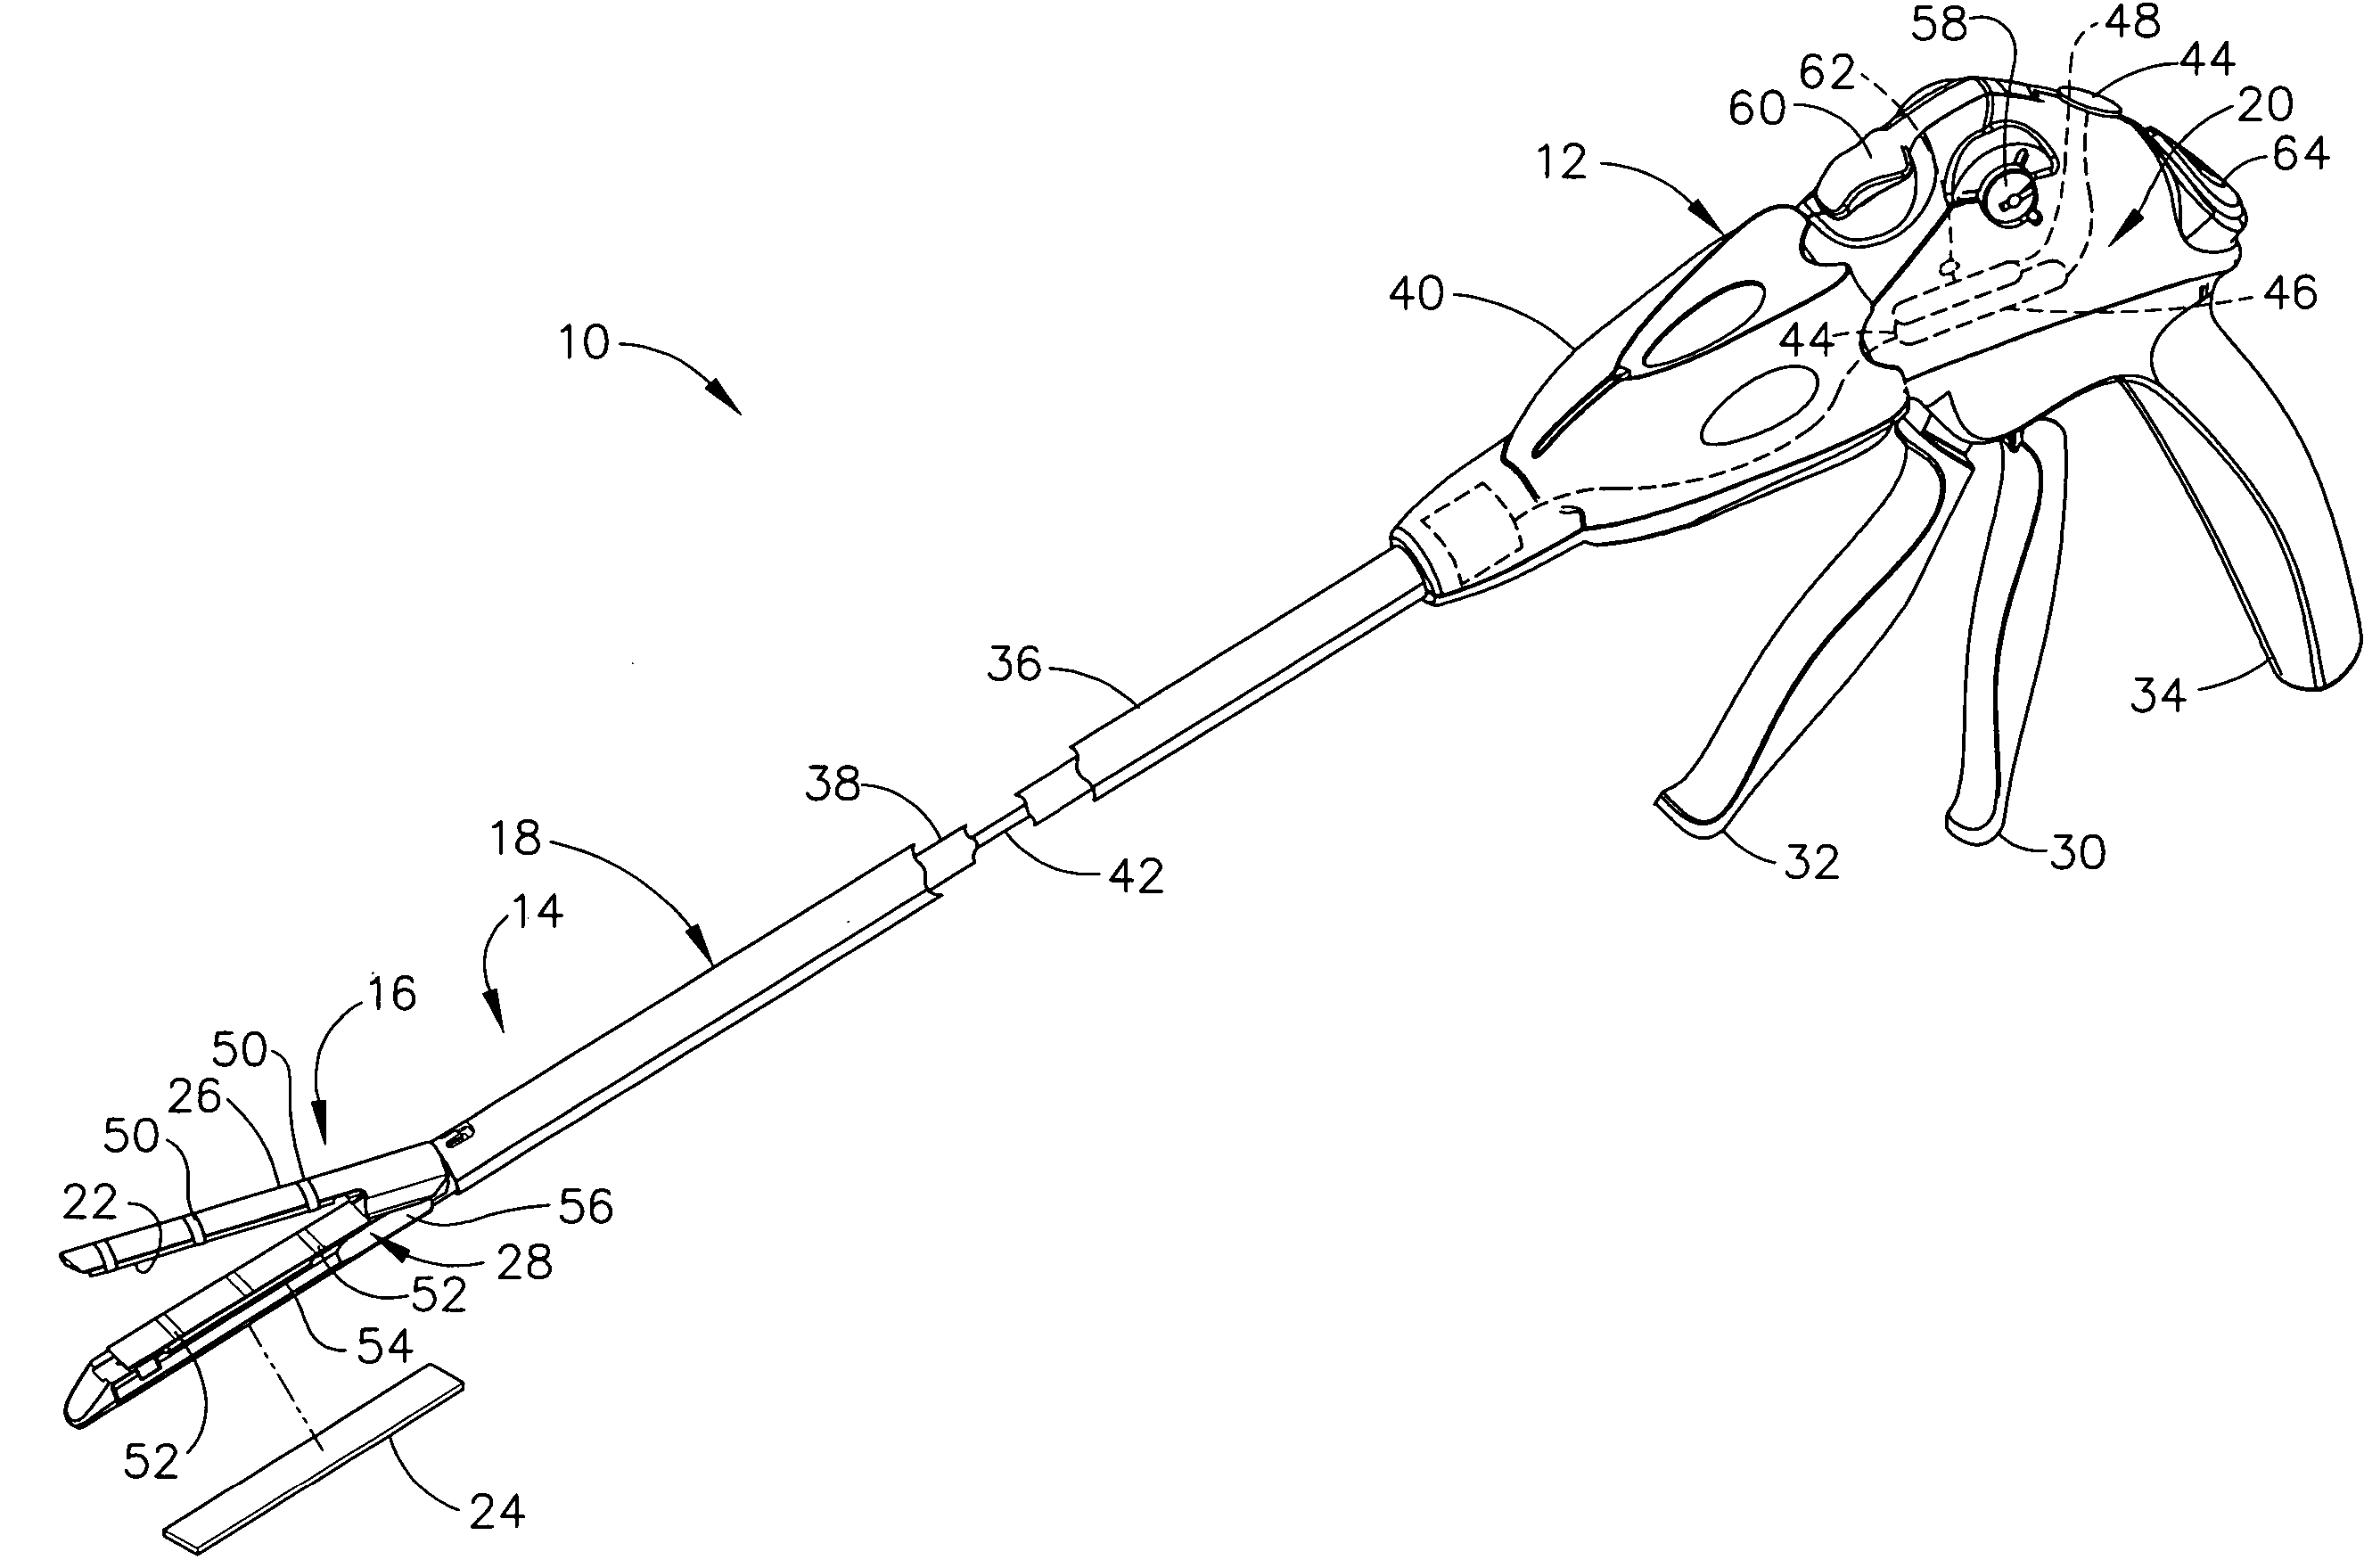 Surgical stapling instrument having an electroactive polymer actuated buttress deployment mechanism